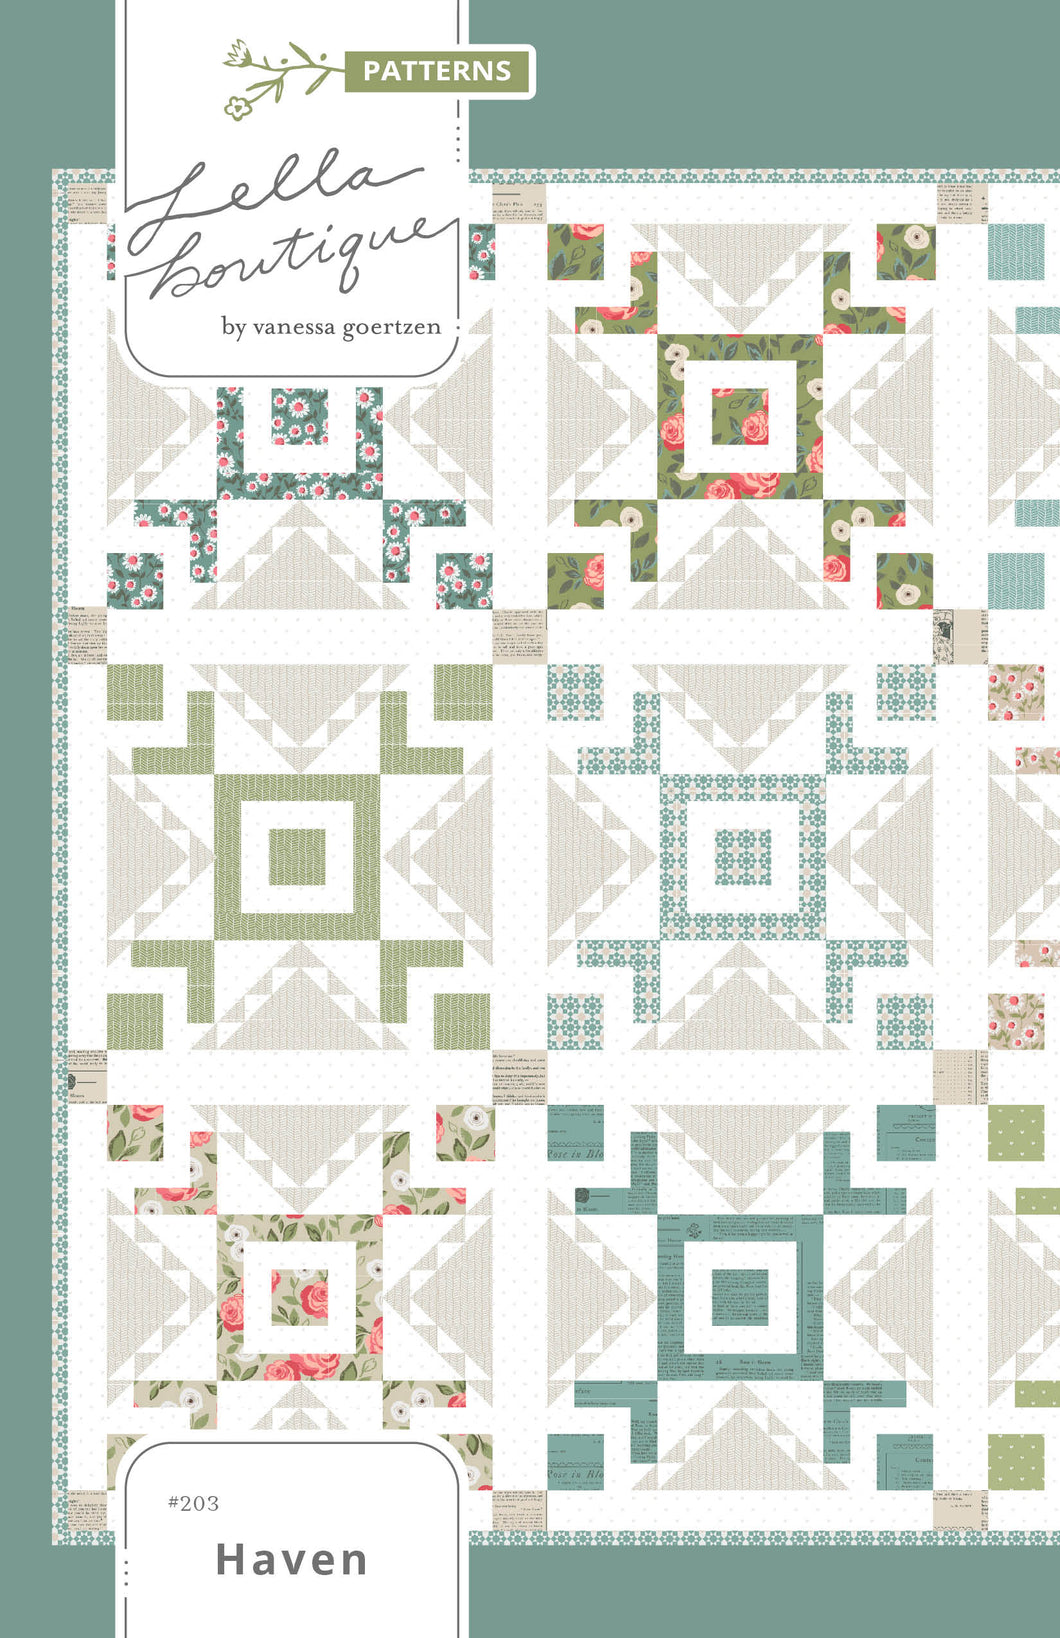 Haven star block quilt pattern by Lella Boutique. Make it with fat quarters. Fabric is Love Note by Lella Boutique for Moda Fabrics.